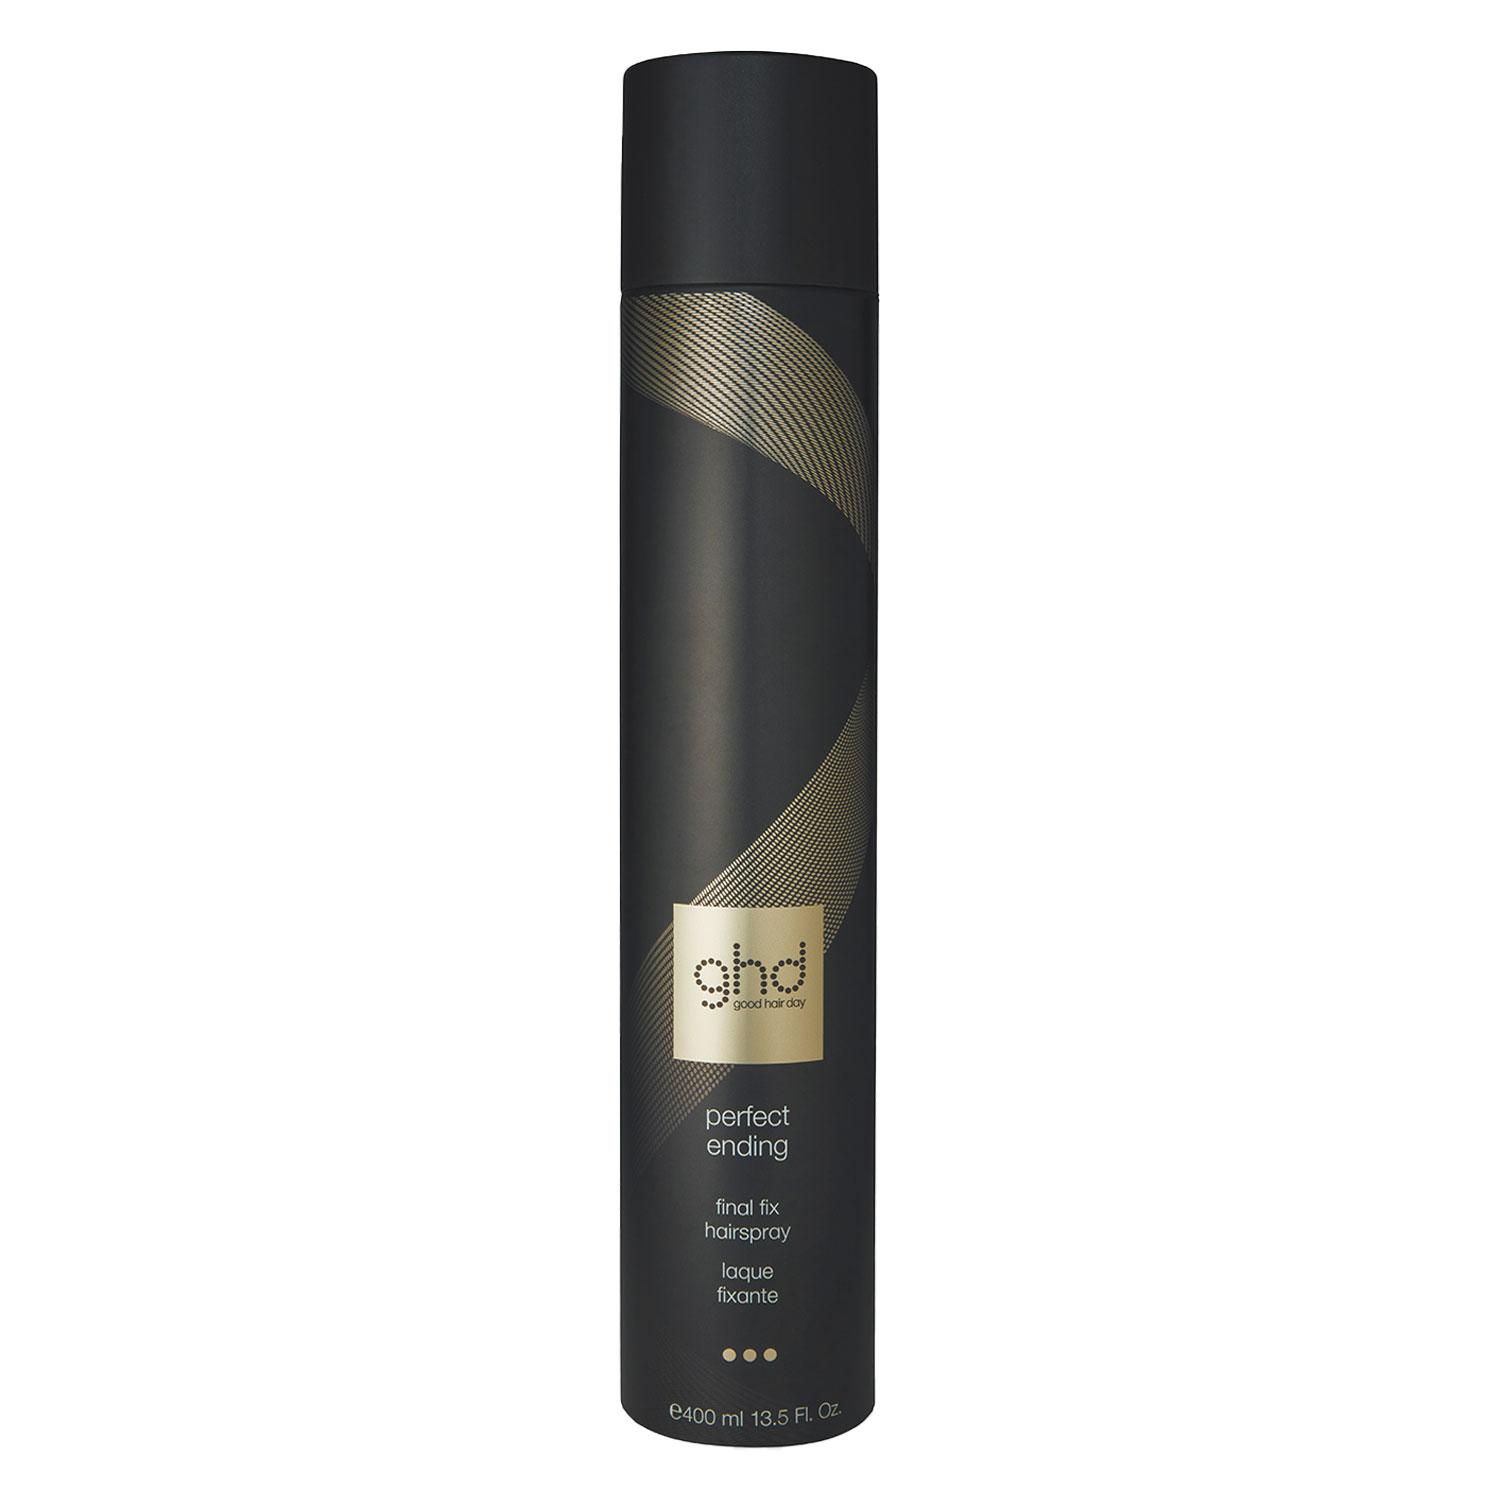 ghd Heat Protection Styling System - Perfect Ending Final Fix Hairspray